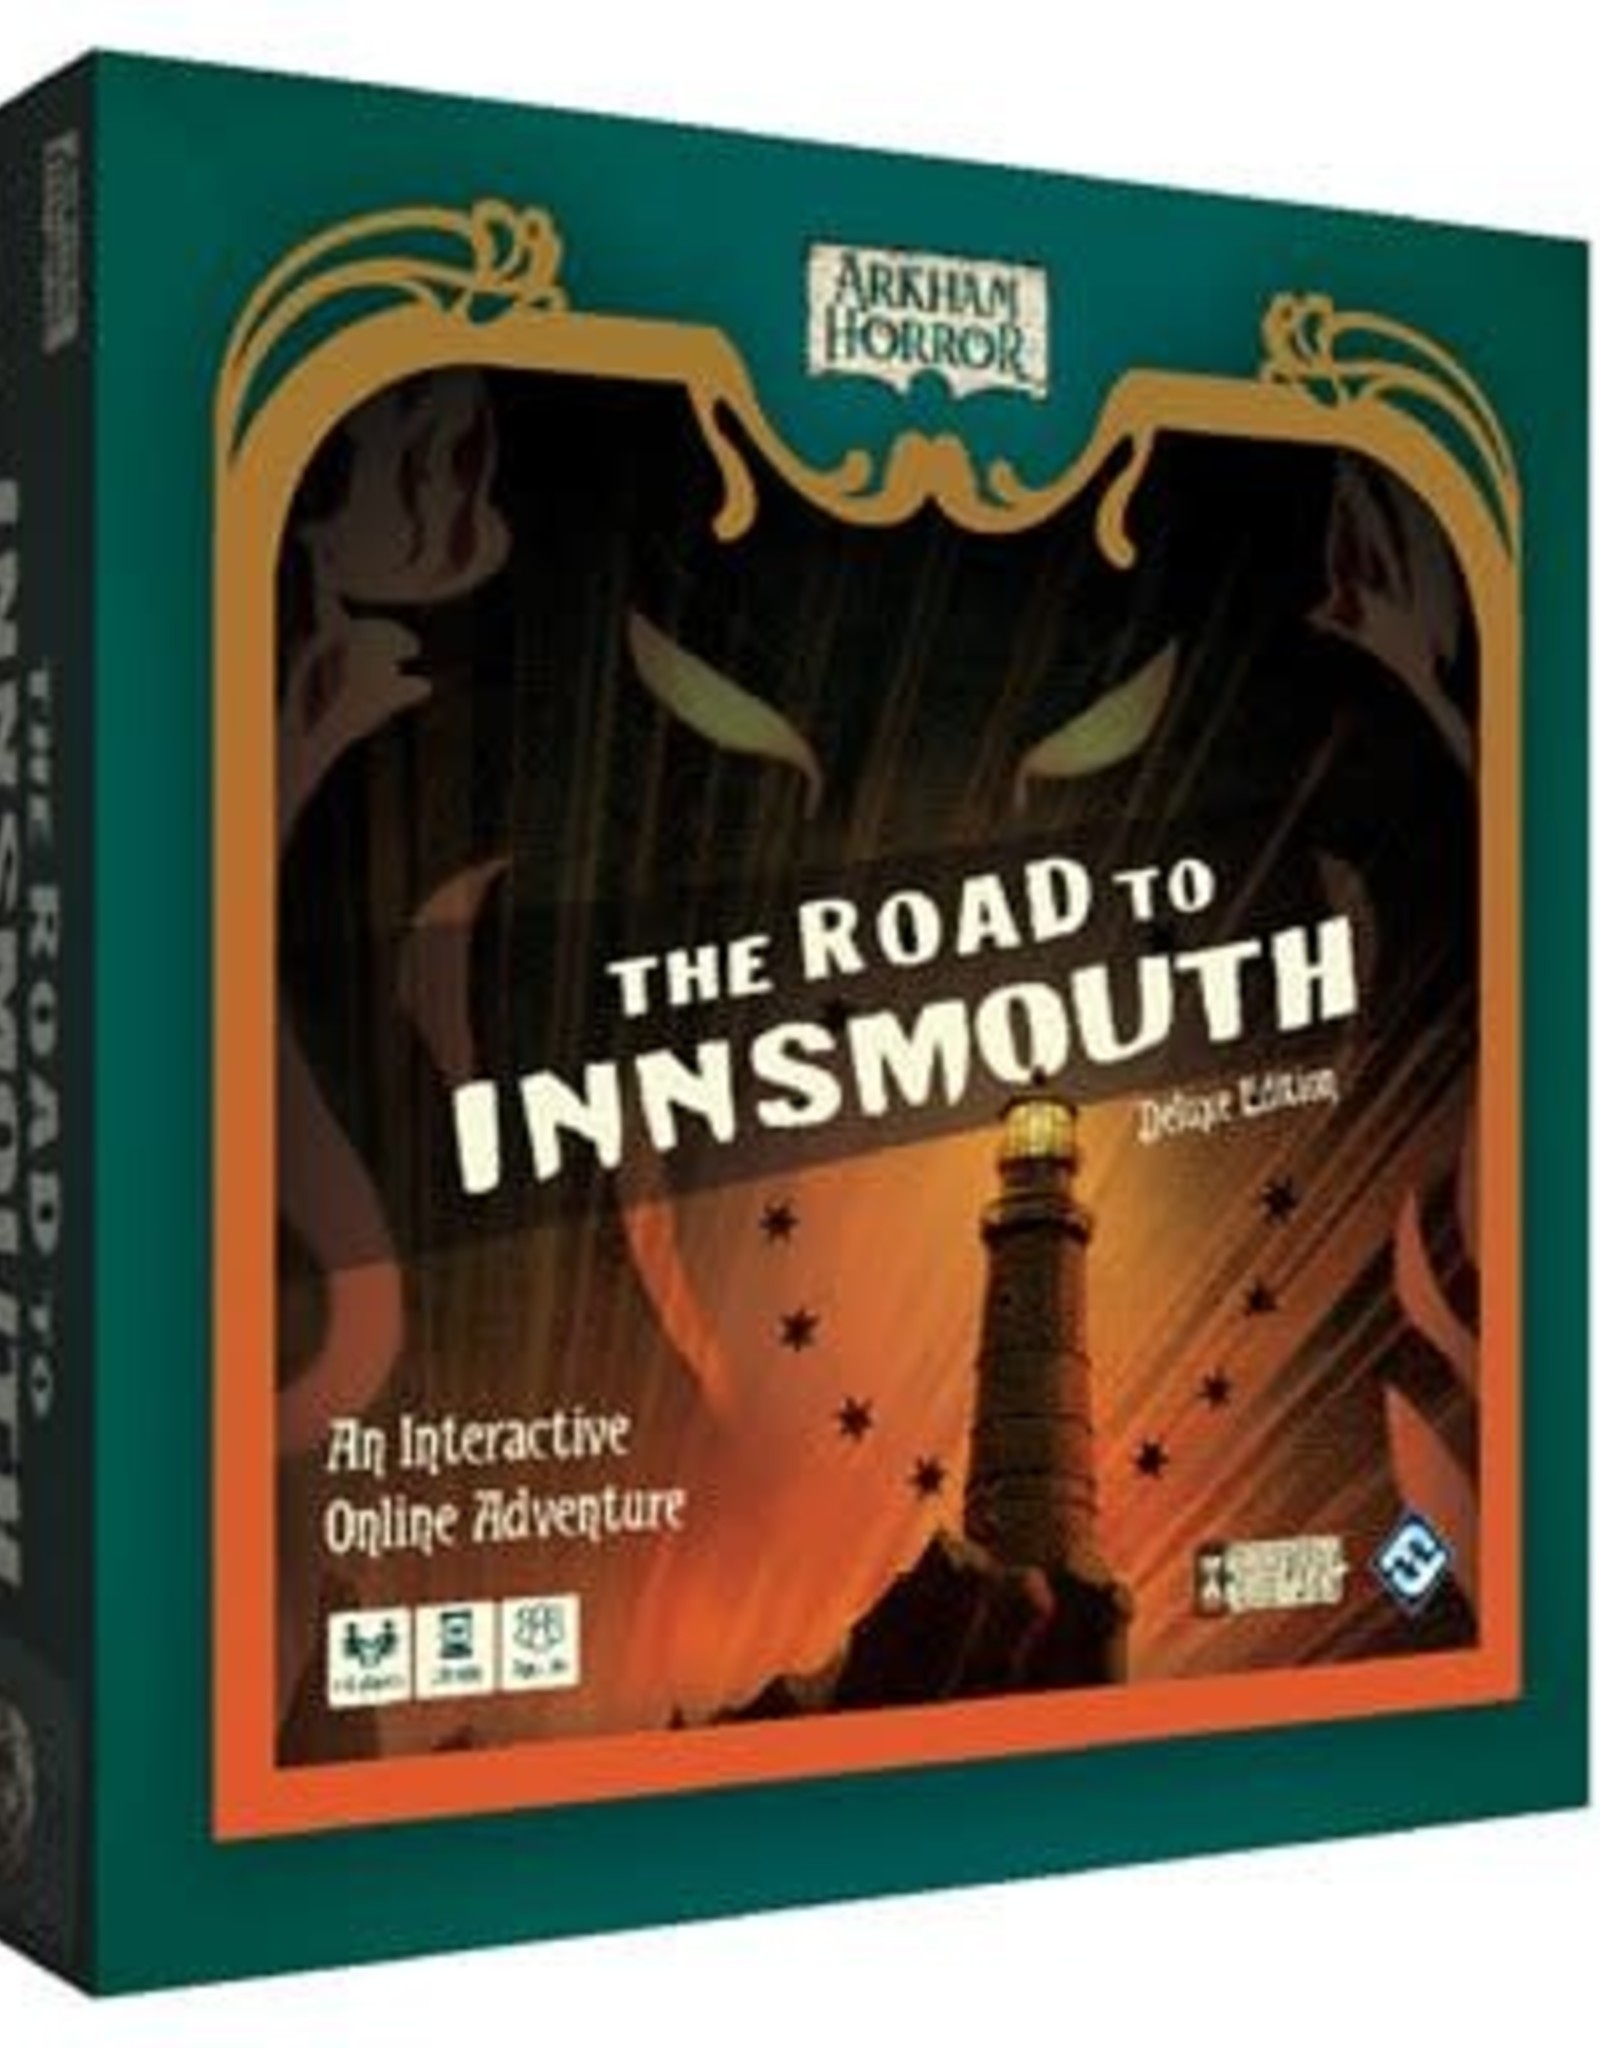 The Road to Innsmouth - An Interactive Online Adventure